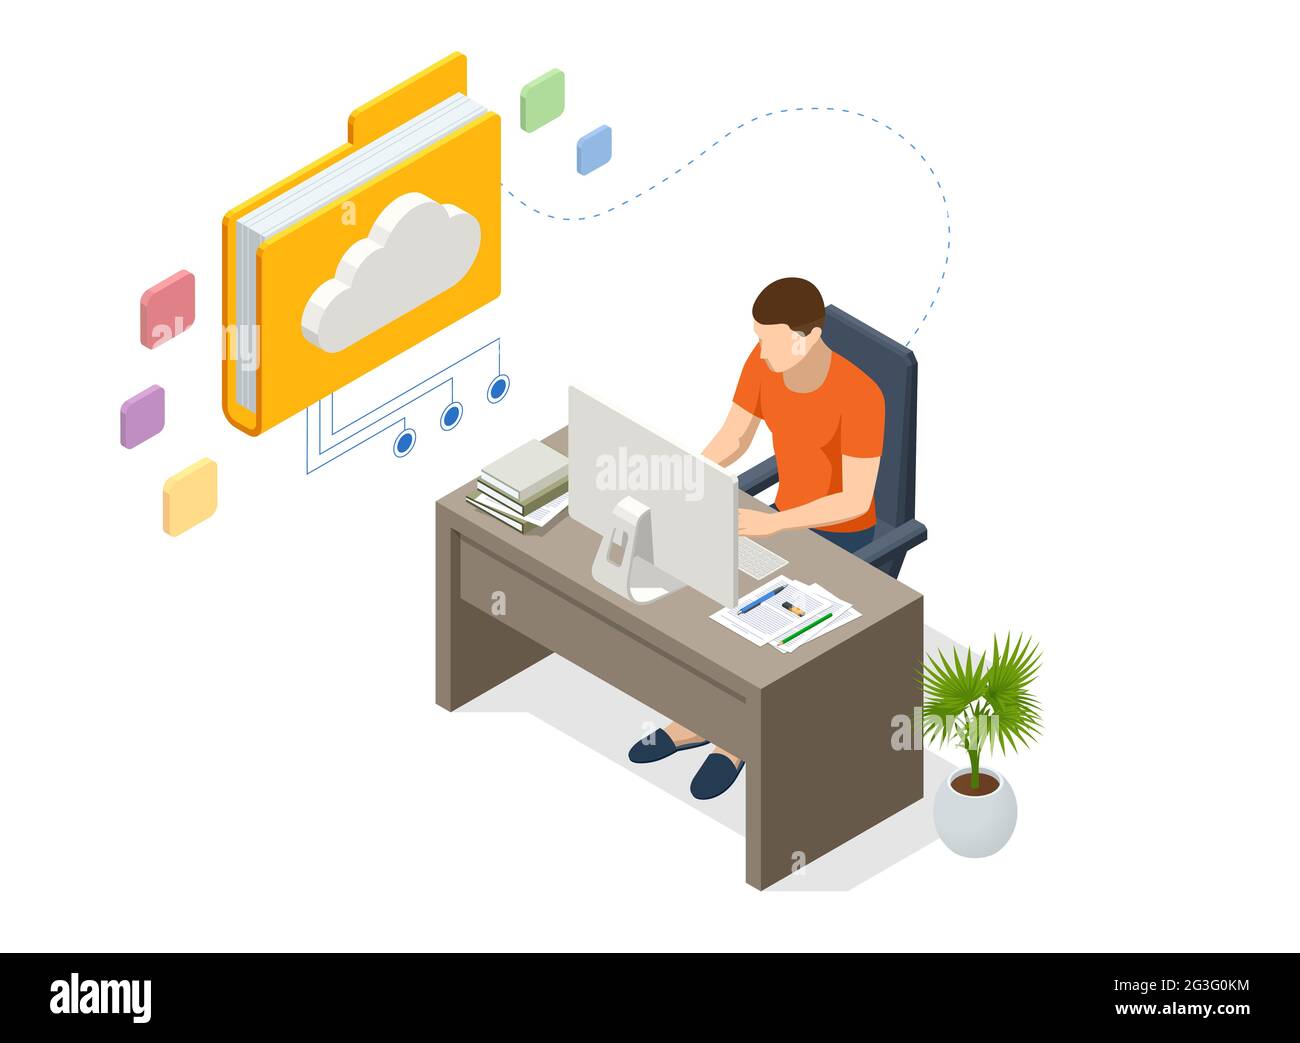 Isometric Cloud Technology. Man Working From Home. Global Outsourcing, People Using Cloud System in Distant Work and Data Storage. Clouds connected Stock Vector